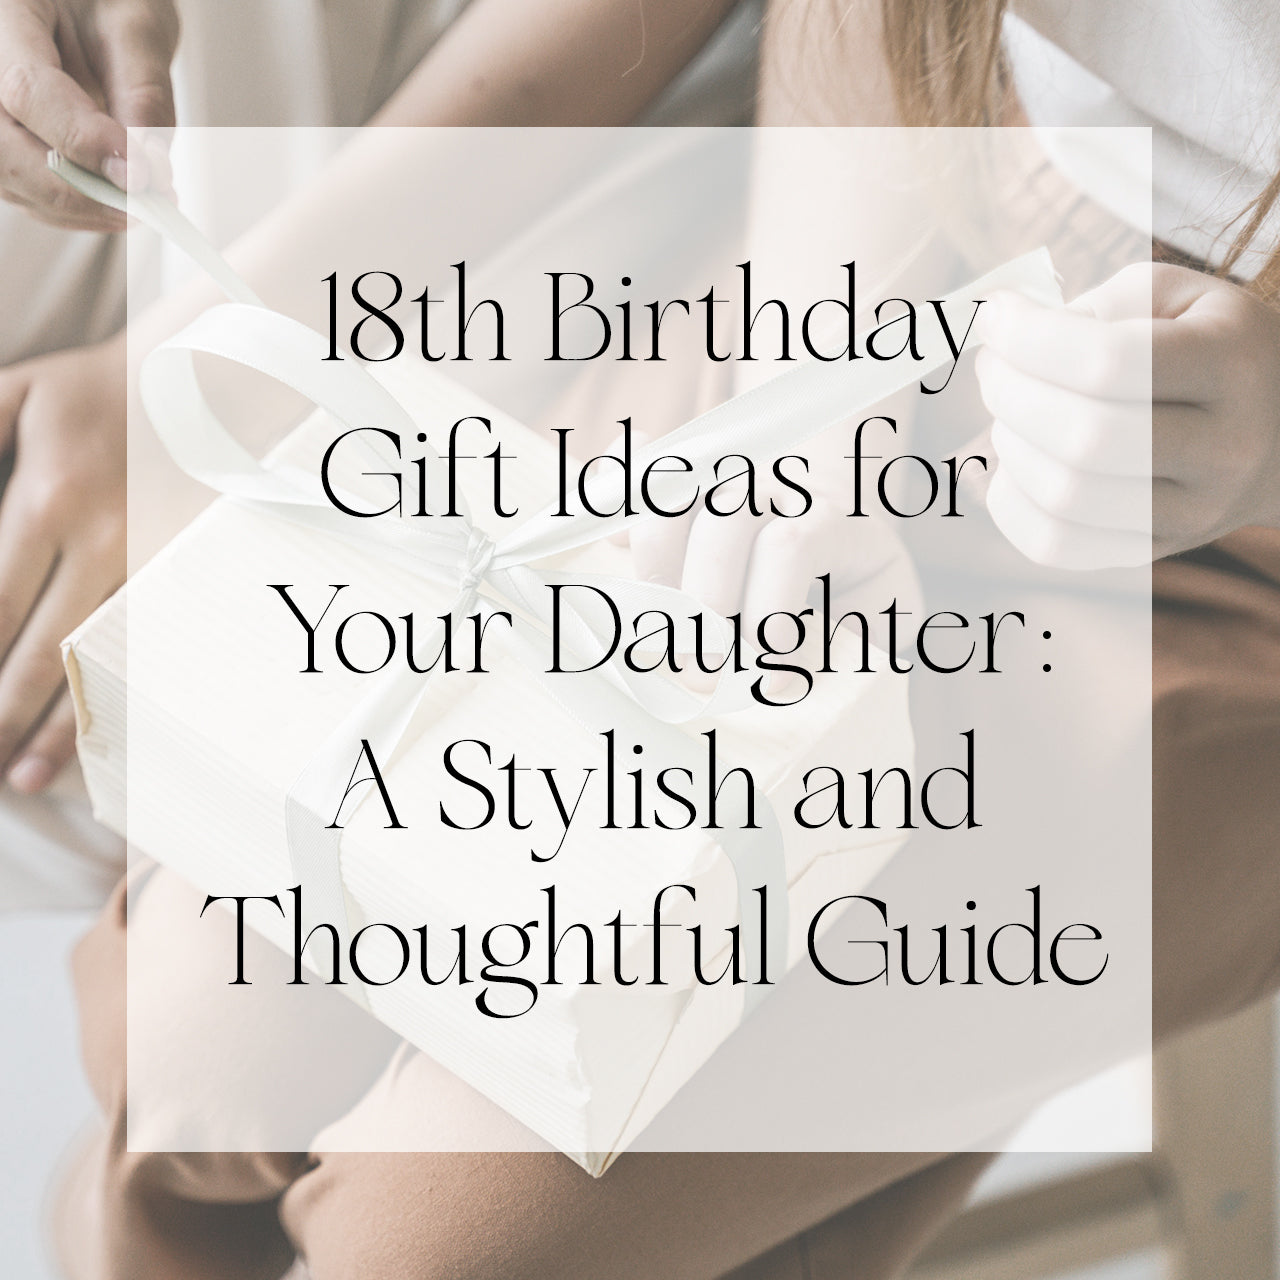 18th Birthday Gift Ideas for Your Daughter: A Stylish and Thoughtful Guide